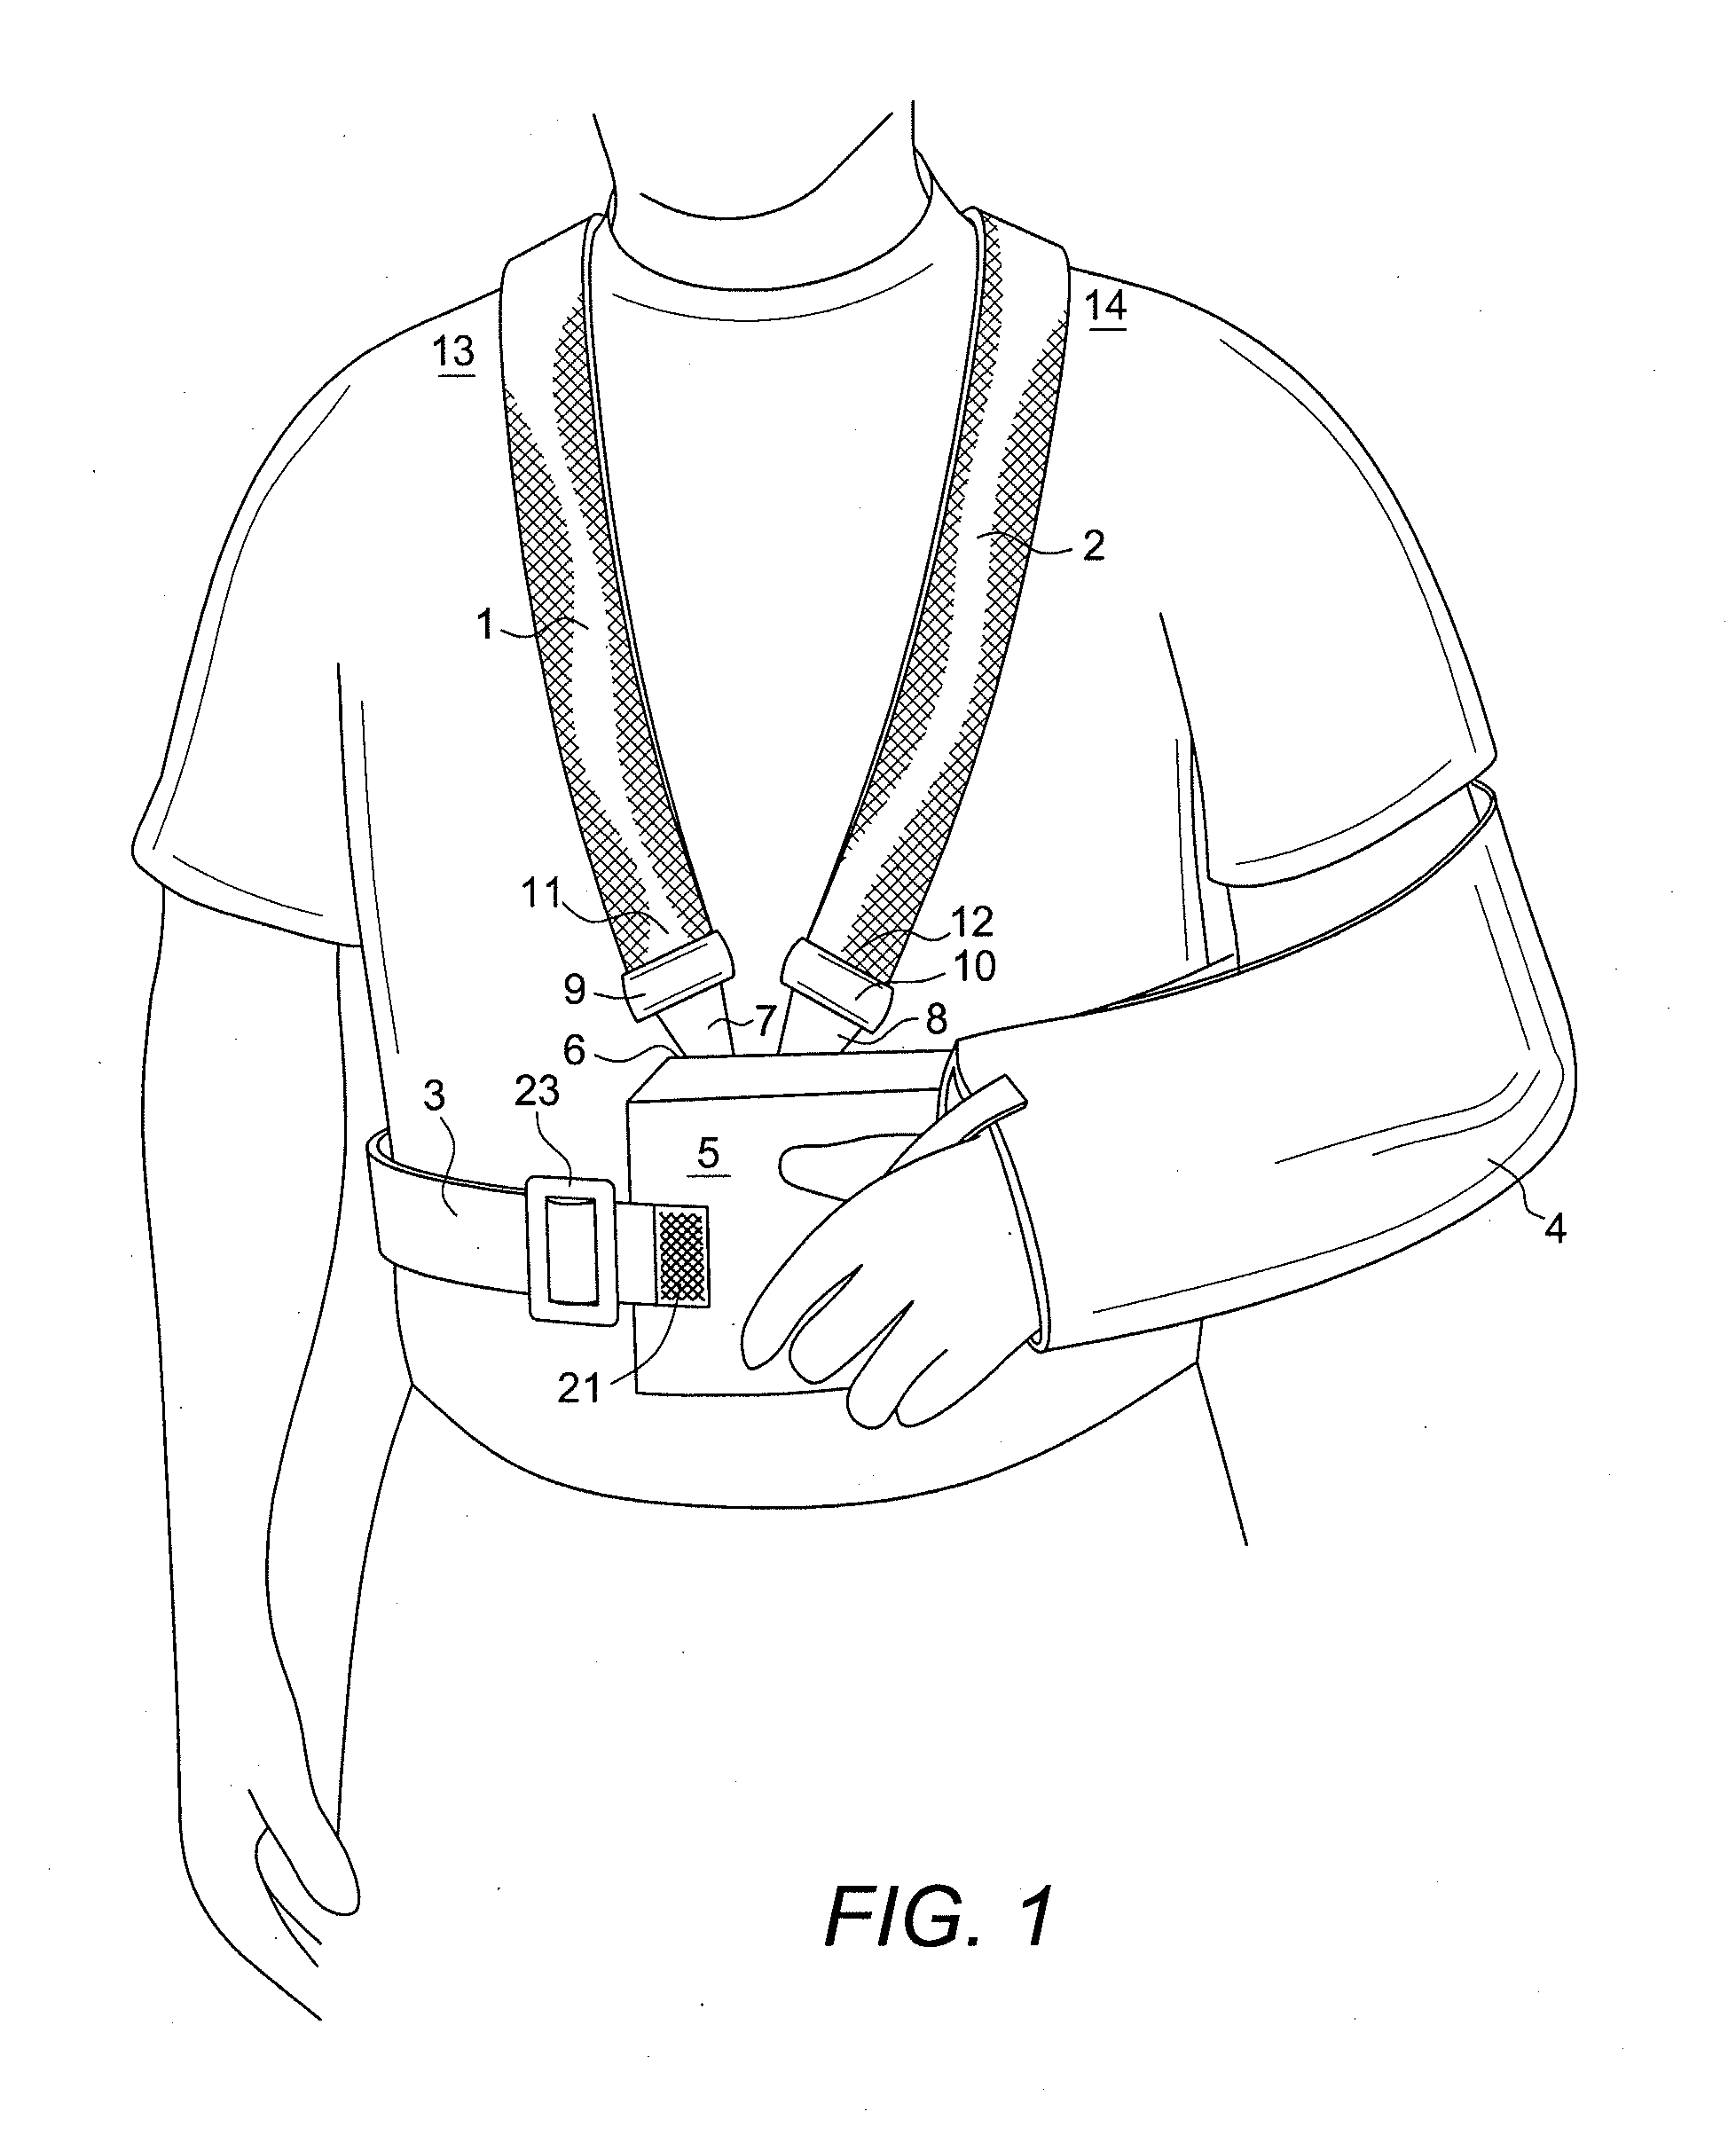 Arm sling with backpack straps